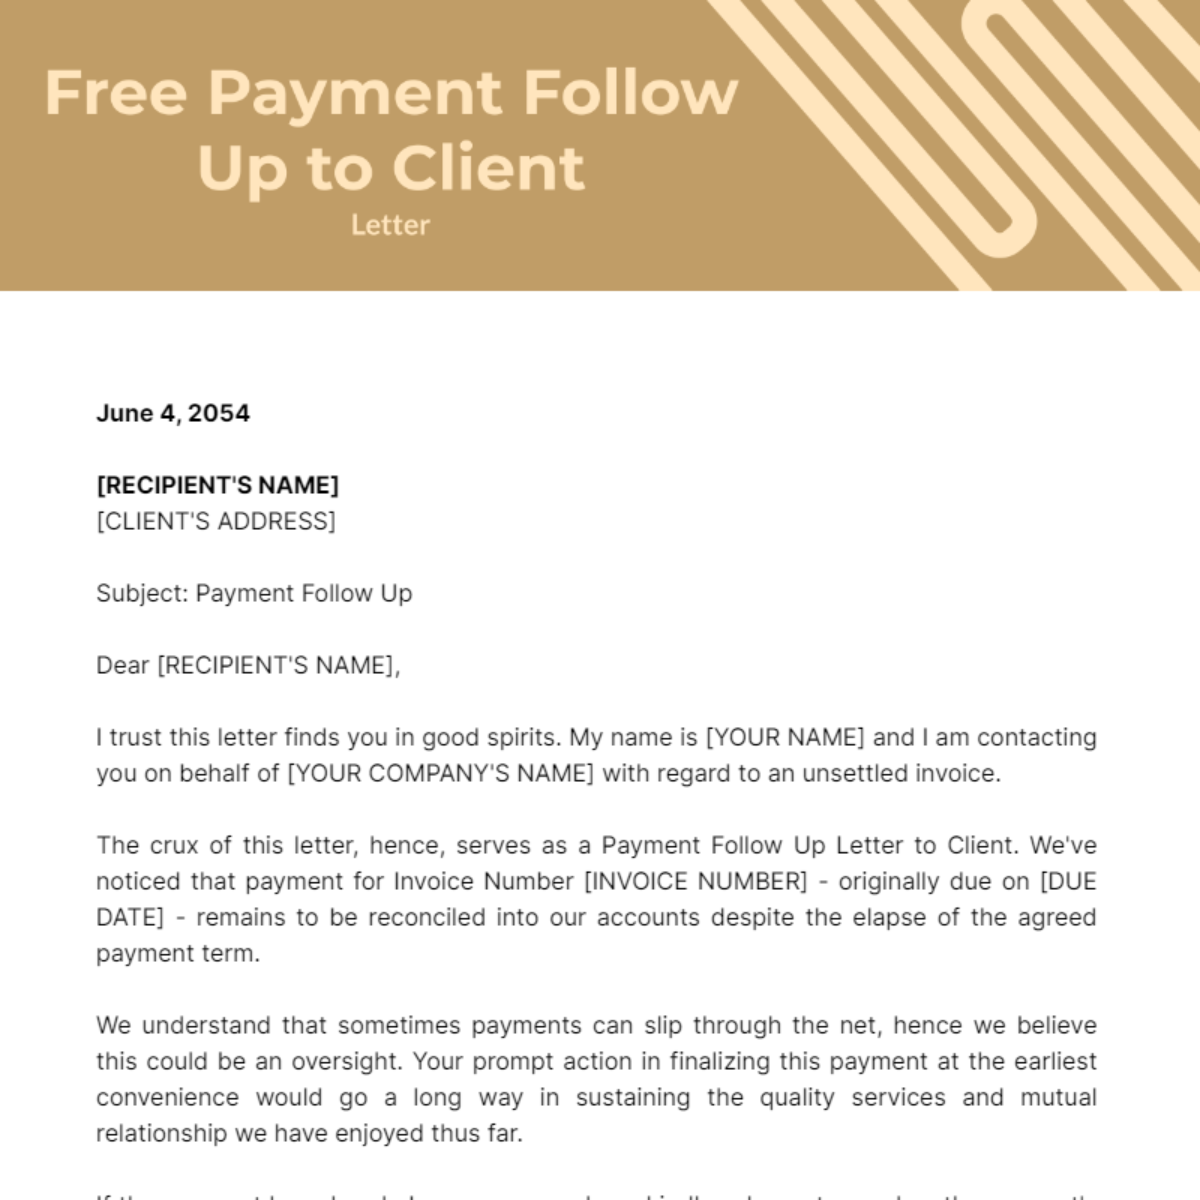 Payment Follow Up Letter to Client Template